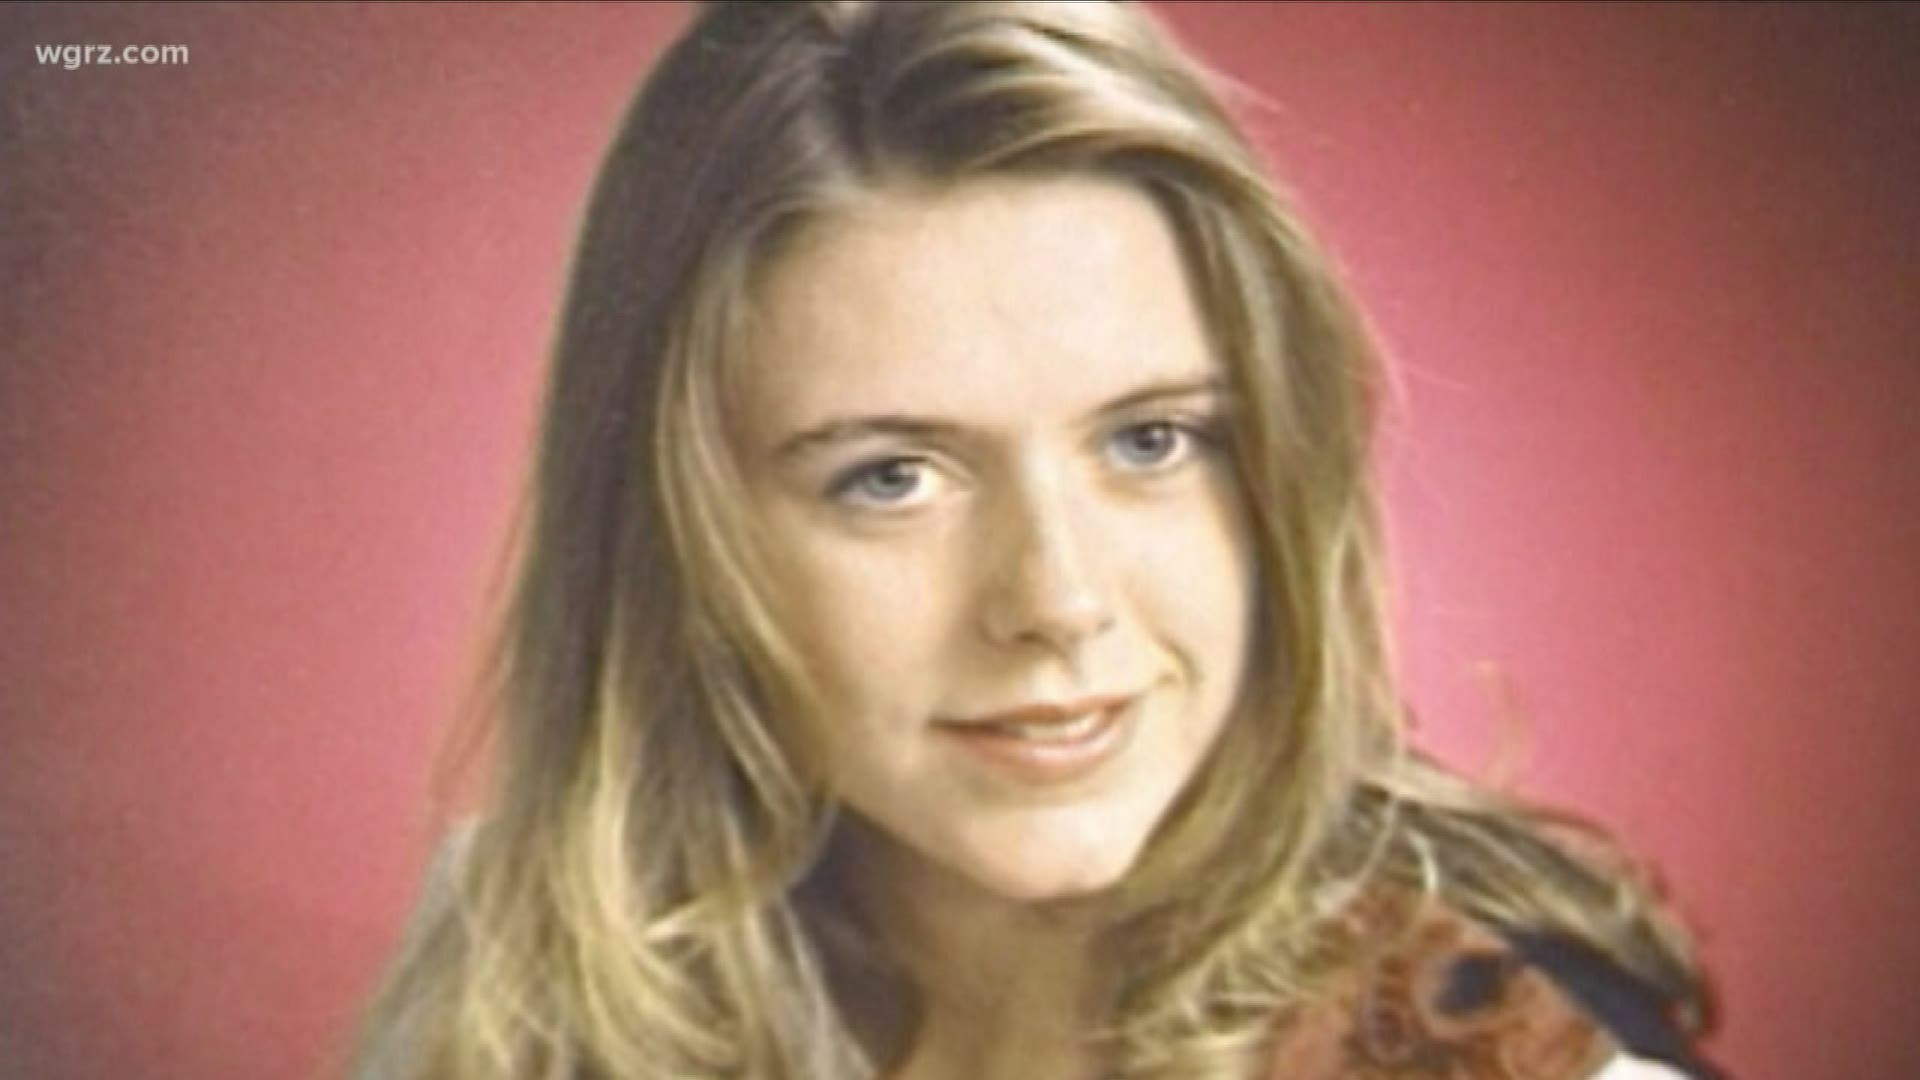 slaying of Mandy Steingasser.
     The body of the then 17 year girl, who was strangled, was found in Bond Lake Park in the fall of 1993.